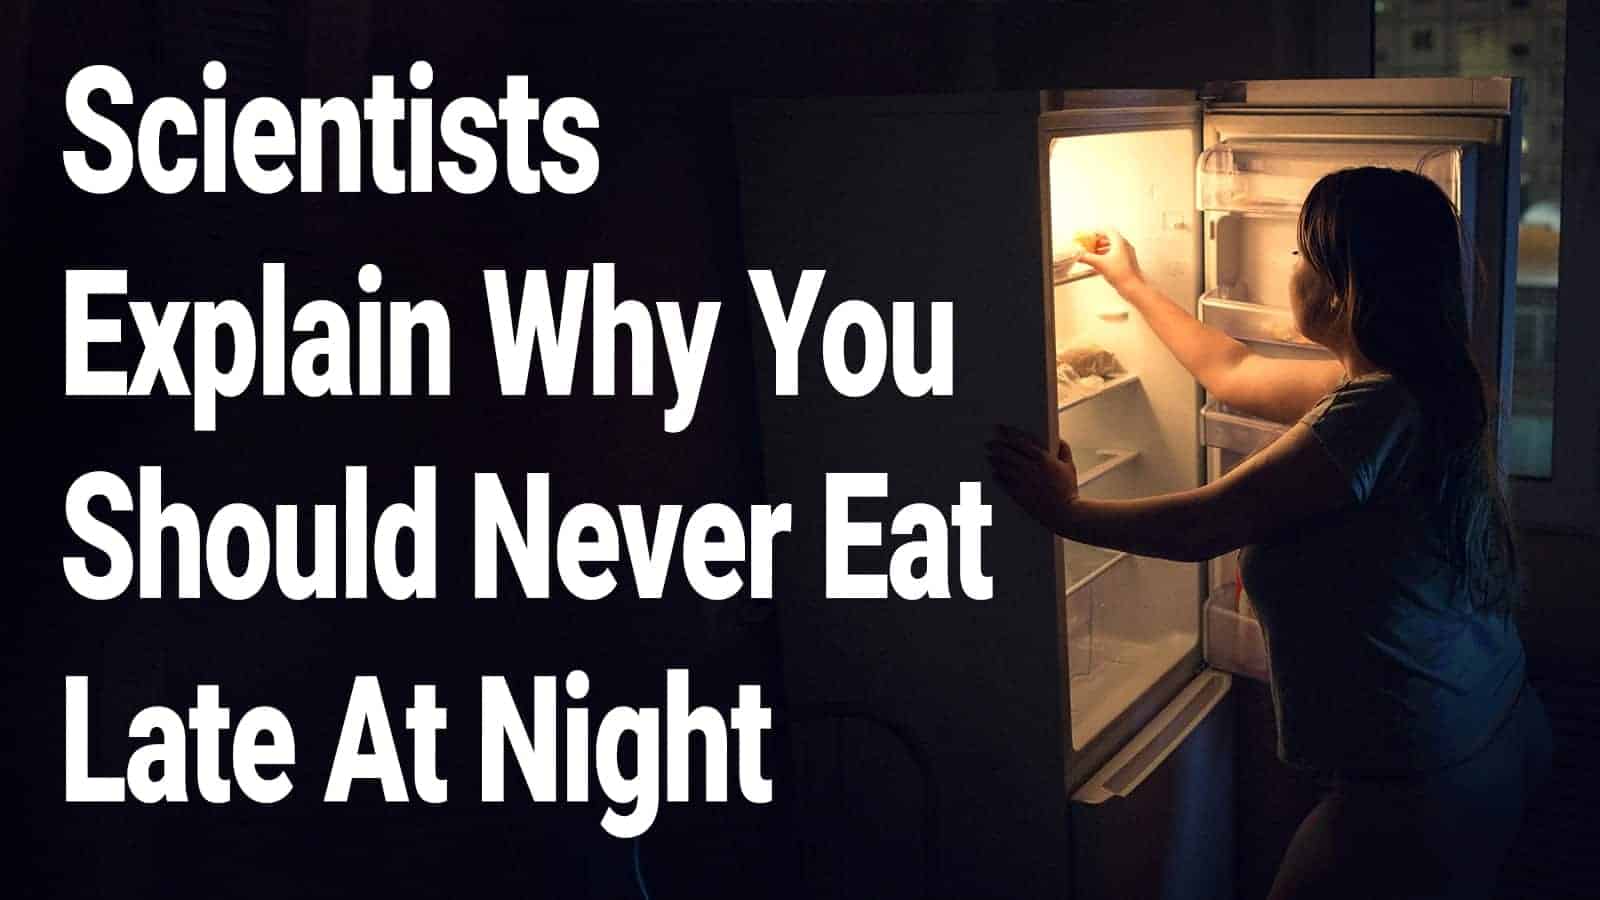 Scientists Explain Why You Should Never Eat Late At Night